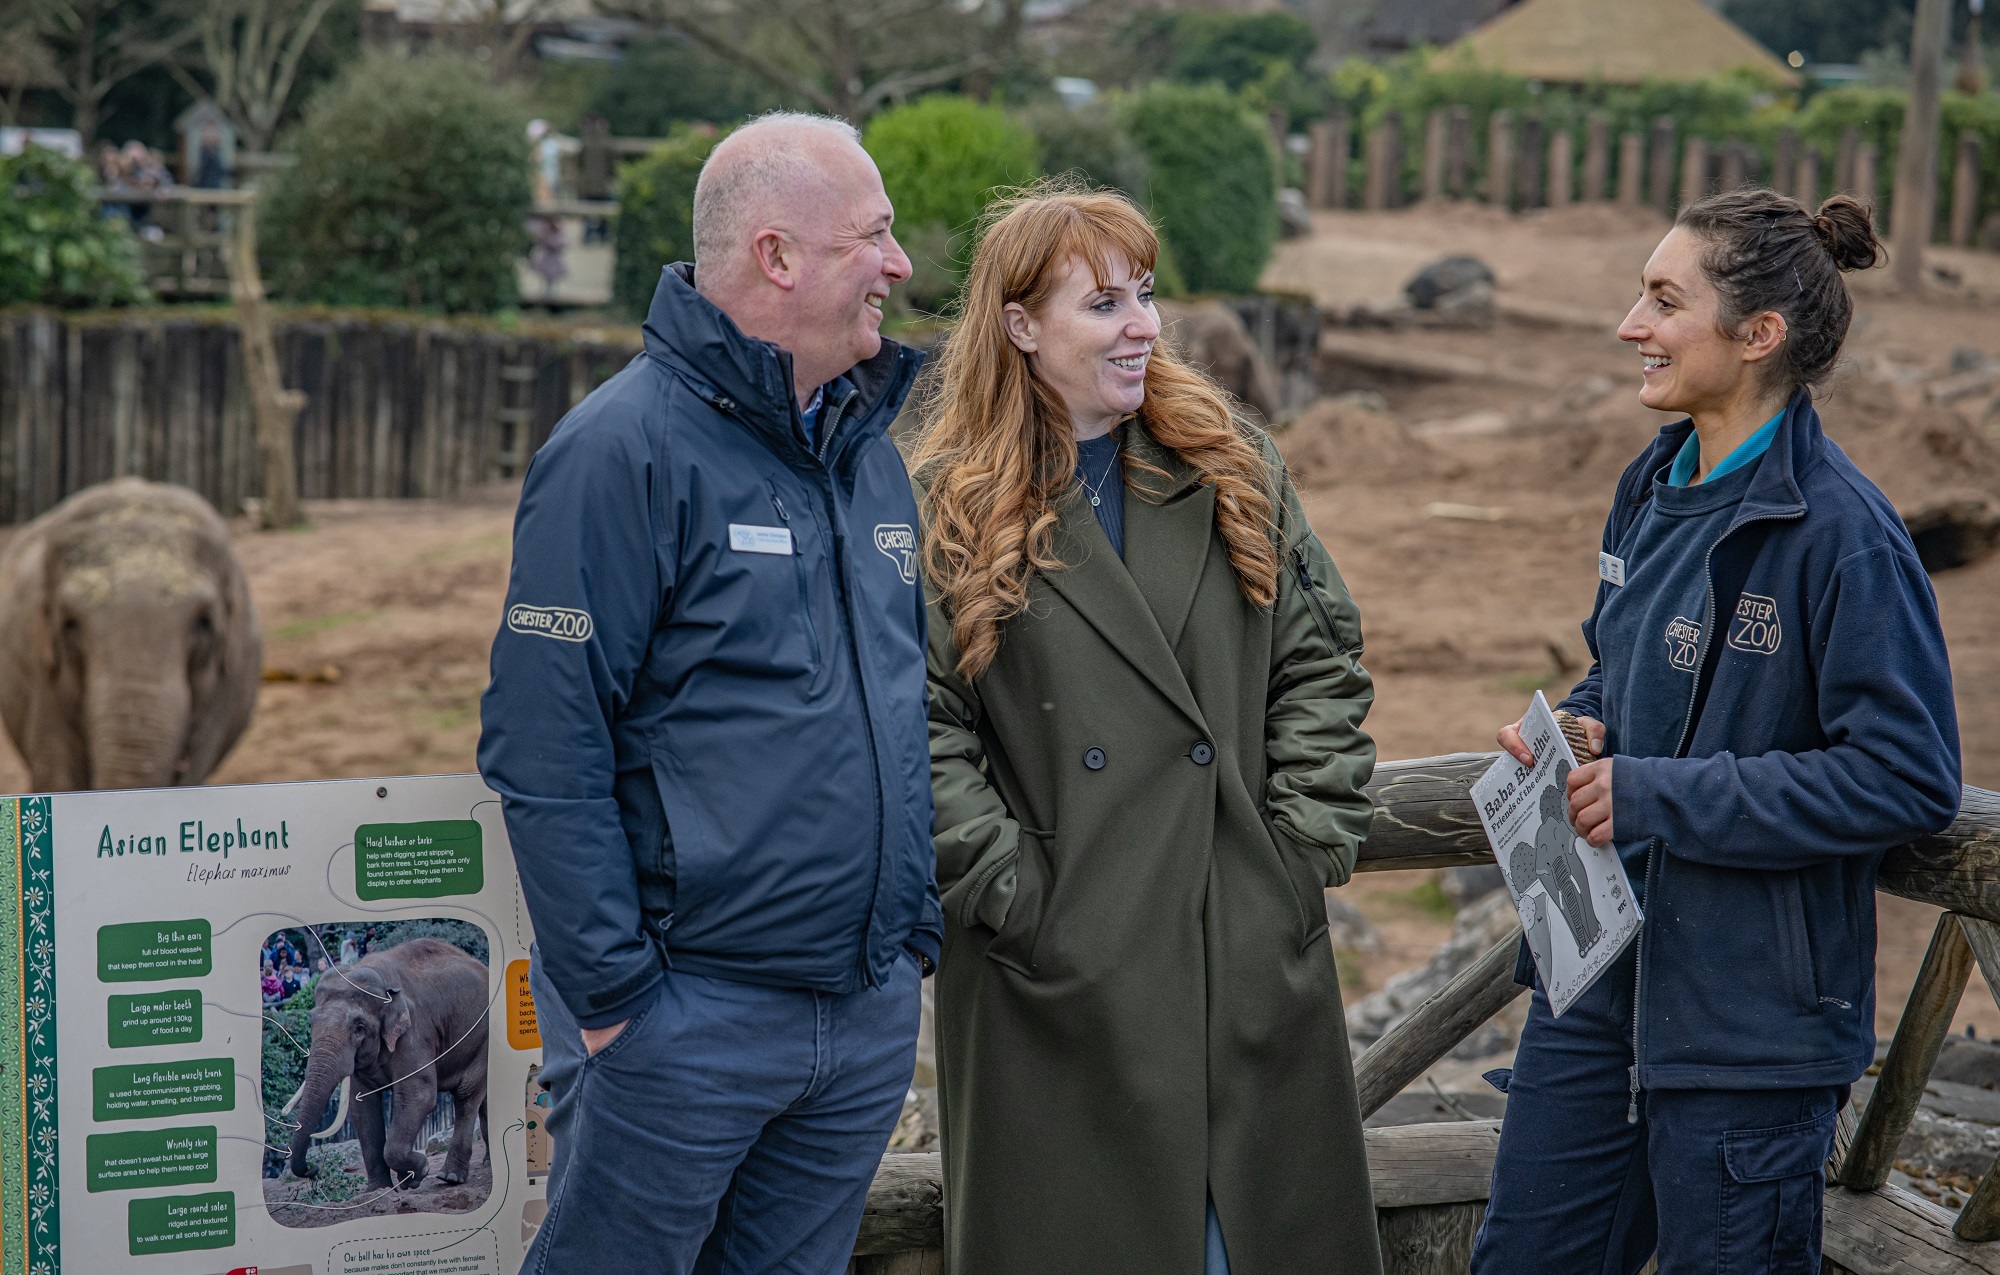 Labour deputy leader Angela Rayner toured Chester Zoo with animal care teams, conservation experts and CEO Jamie Christon.